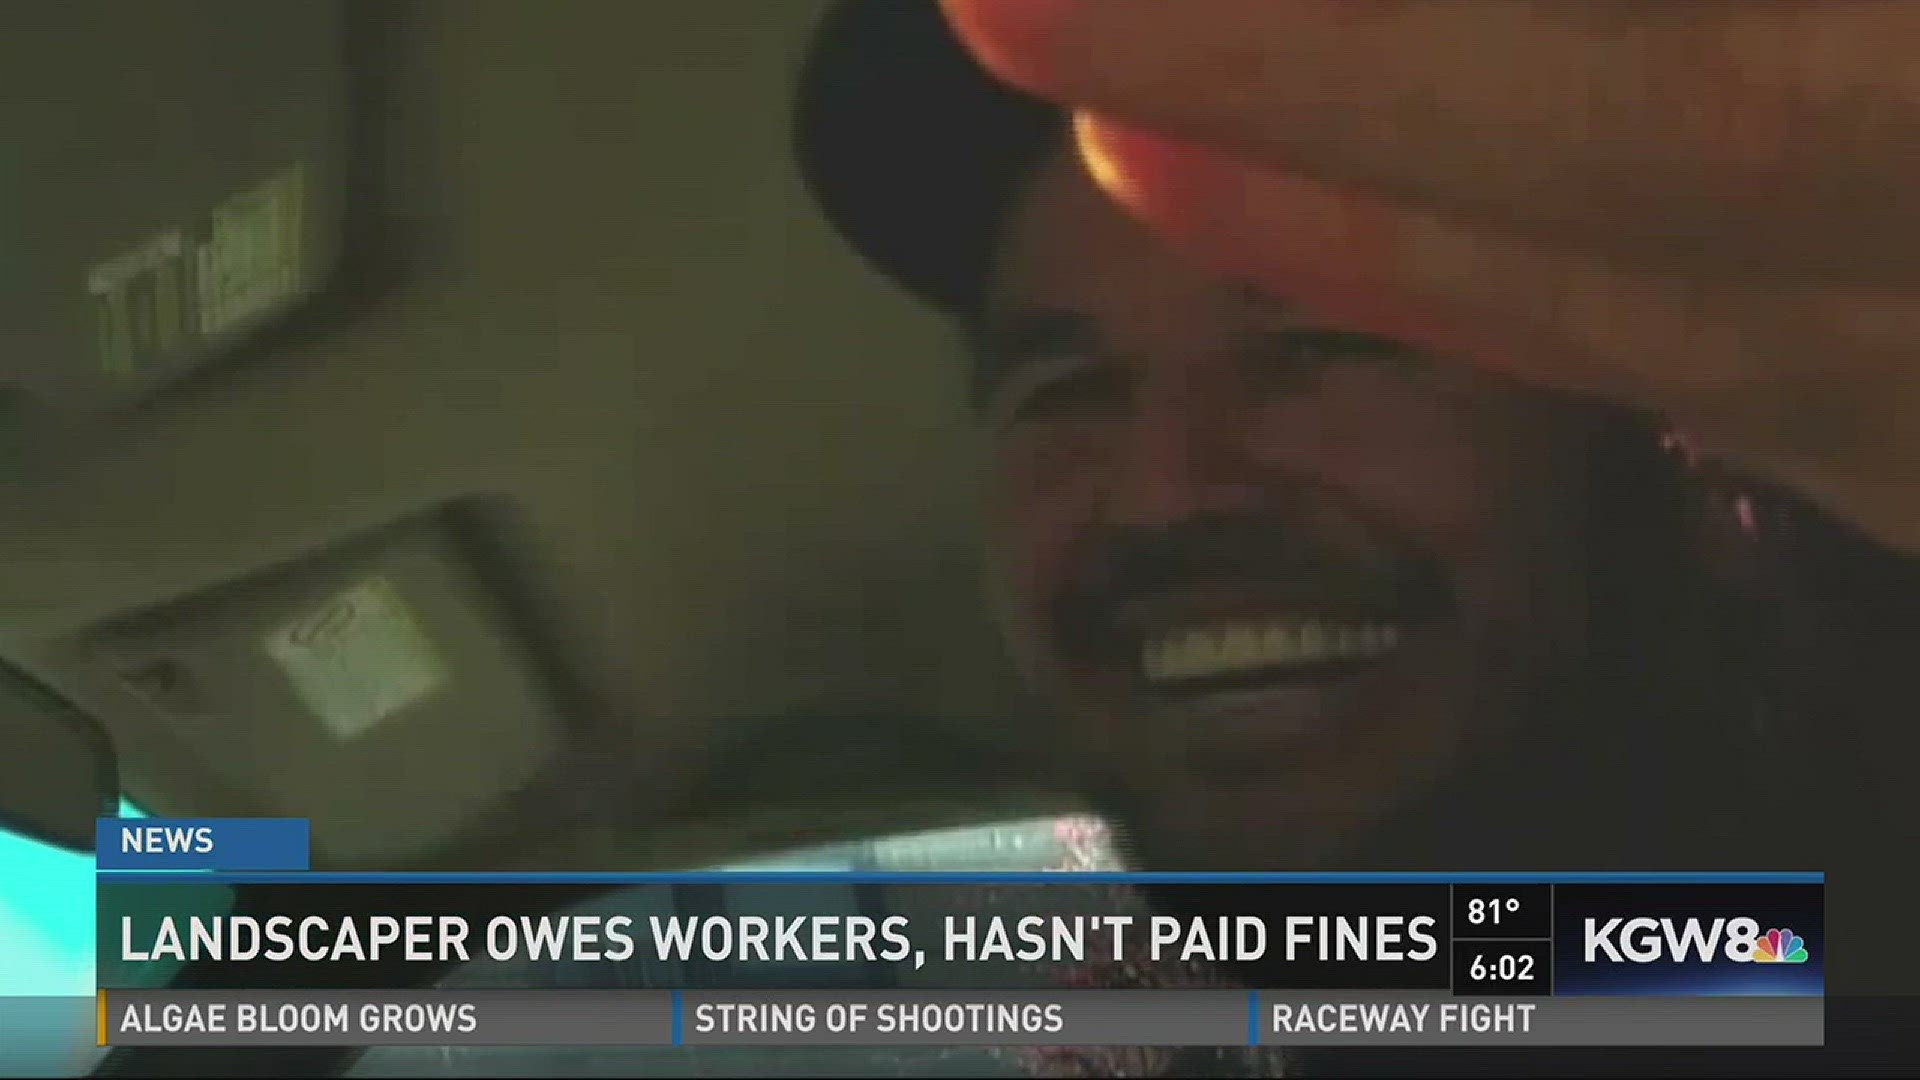 Landscaper owes workers thousands in unpaid wages